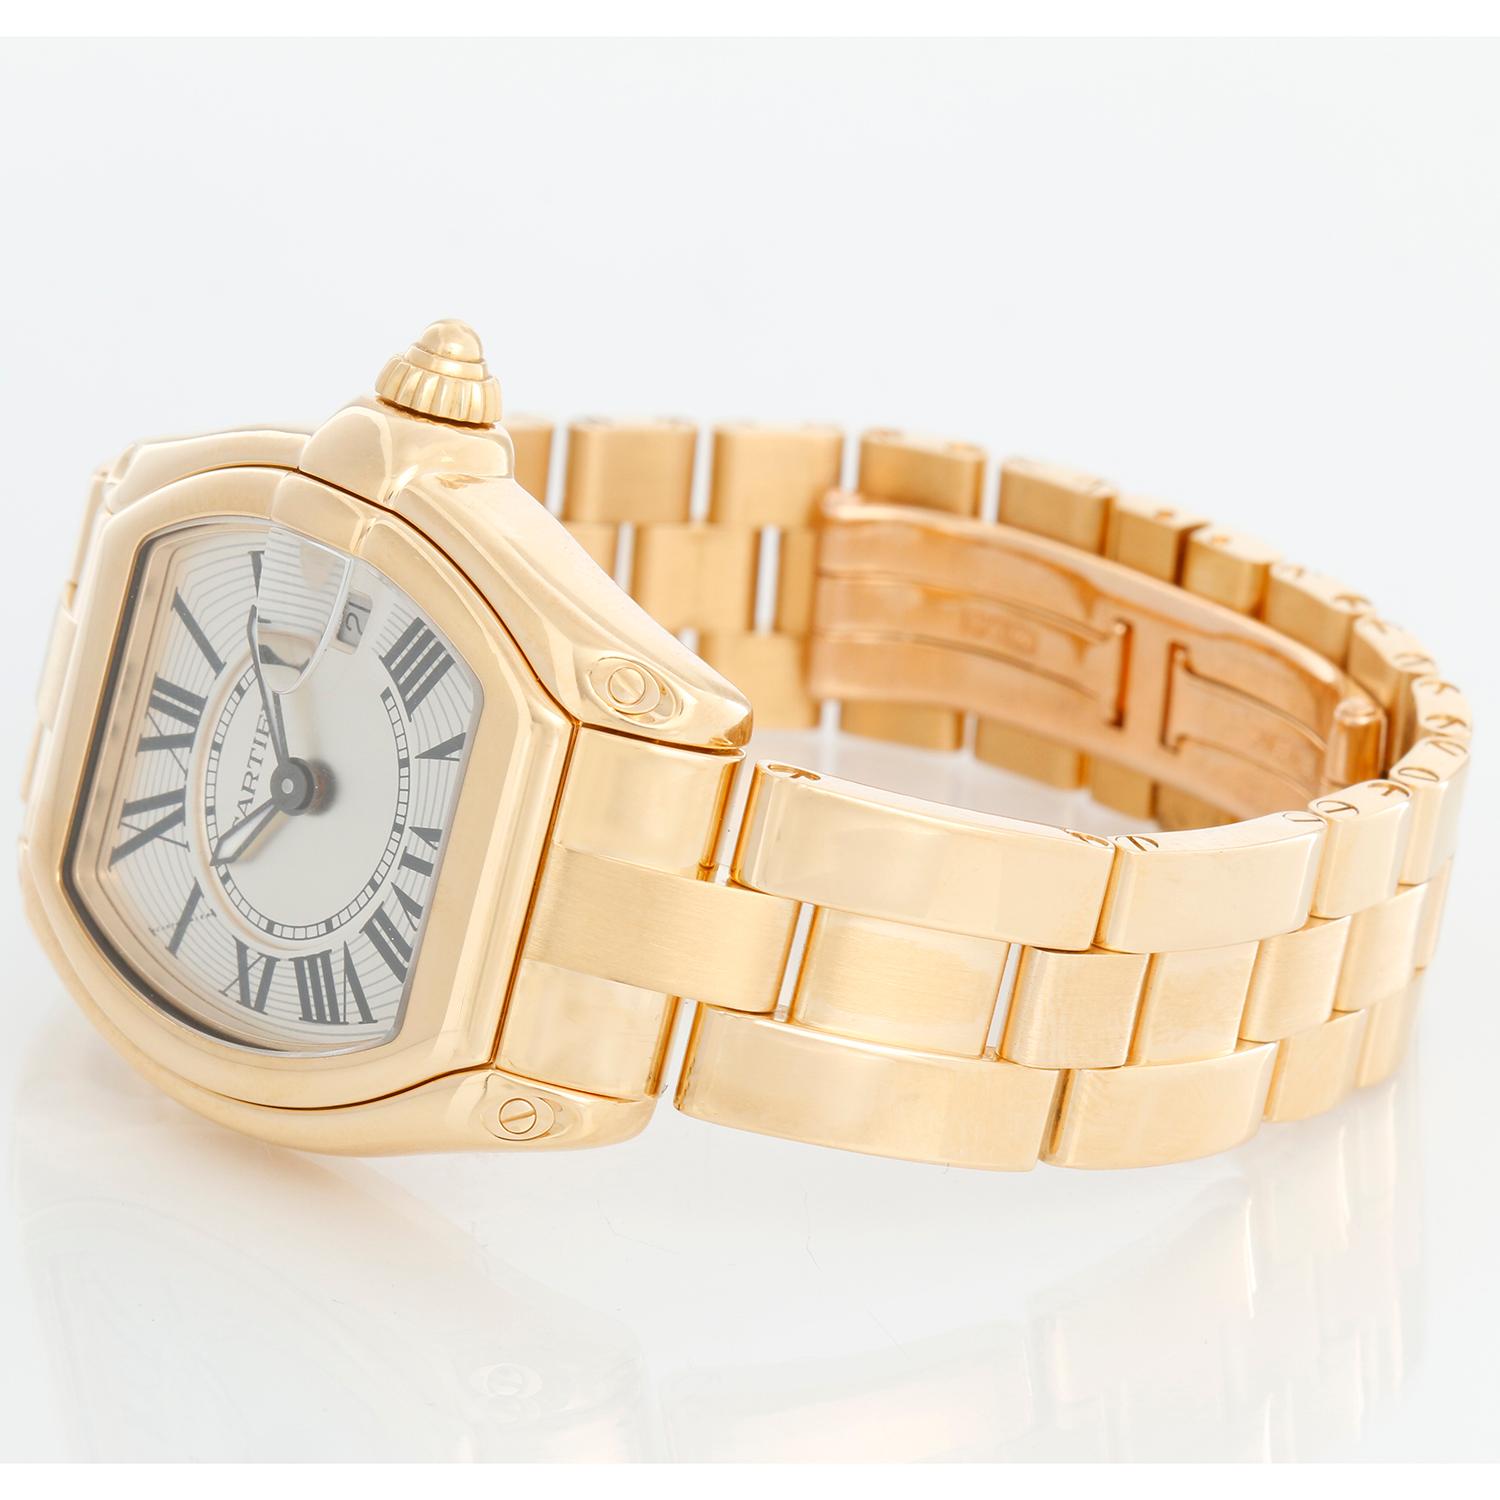 Cartier Roadster 18k Yellow Gold Quartz W620W62018Y18V1 2676 - Quartz. 18k yellow gold tonneau style case (31mm x 37mm). Silver guilloche dial with black Roman numerals; date at 3 o'clock. 18k yellow gold Cartier bracelet with deployant clasp.